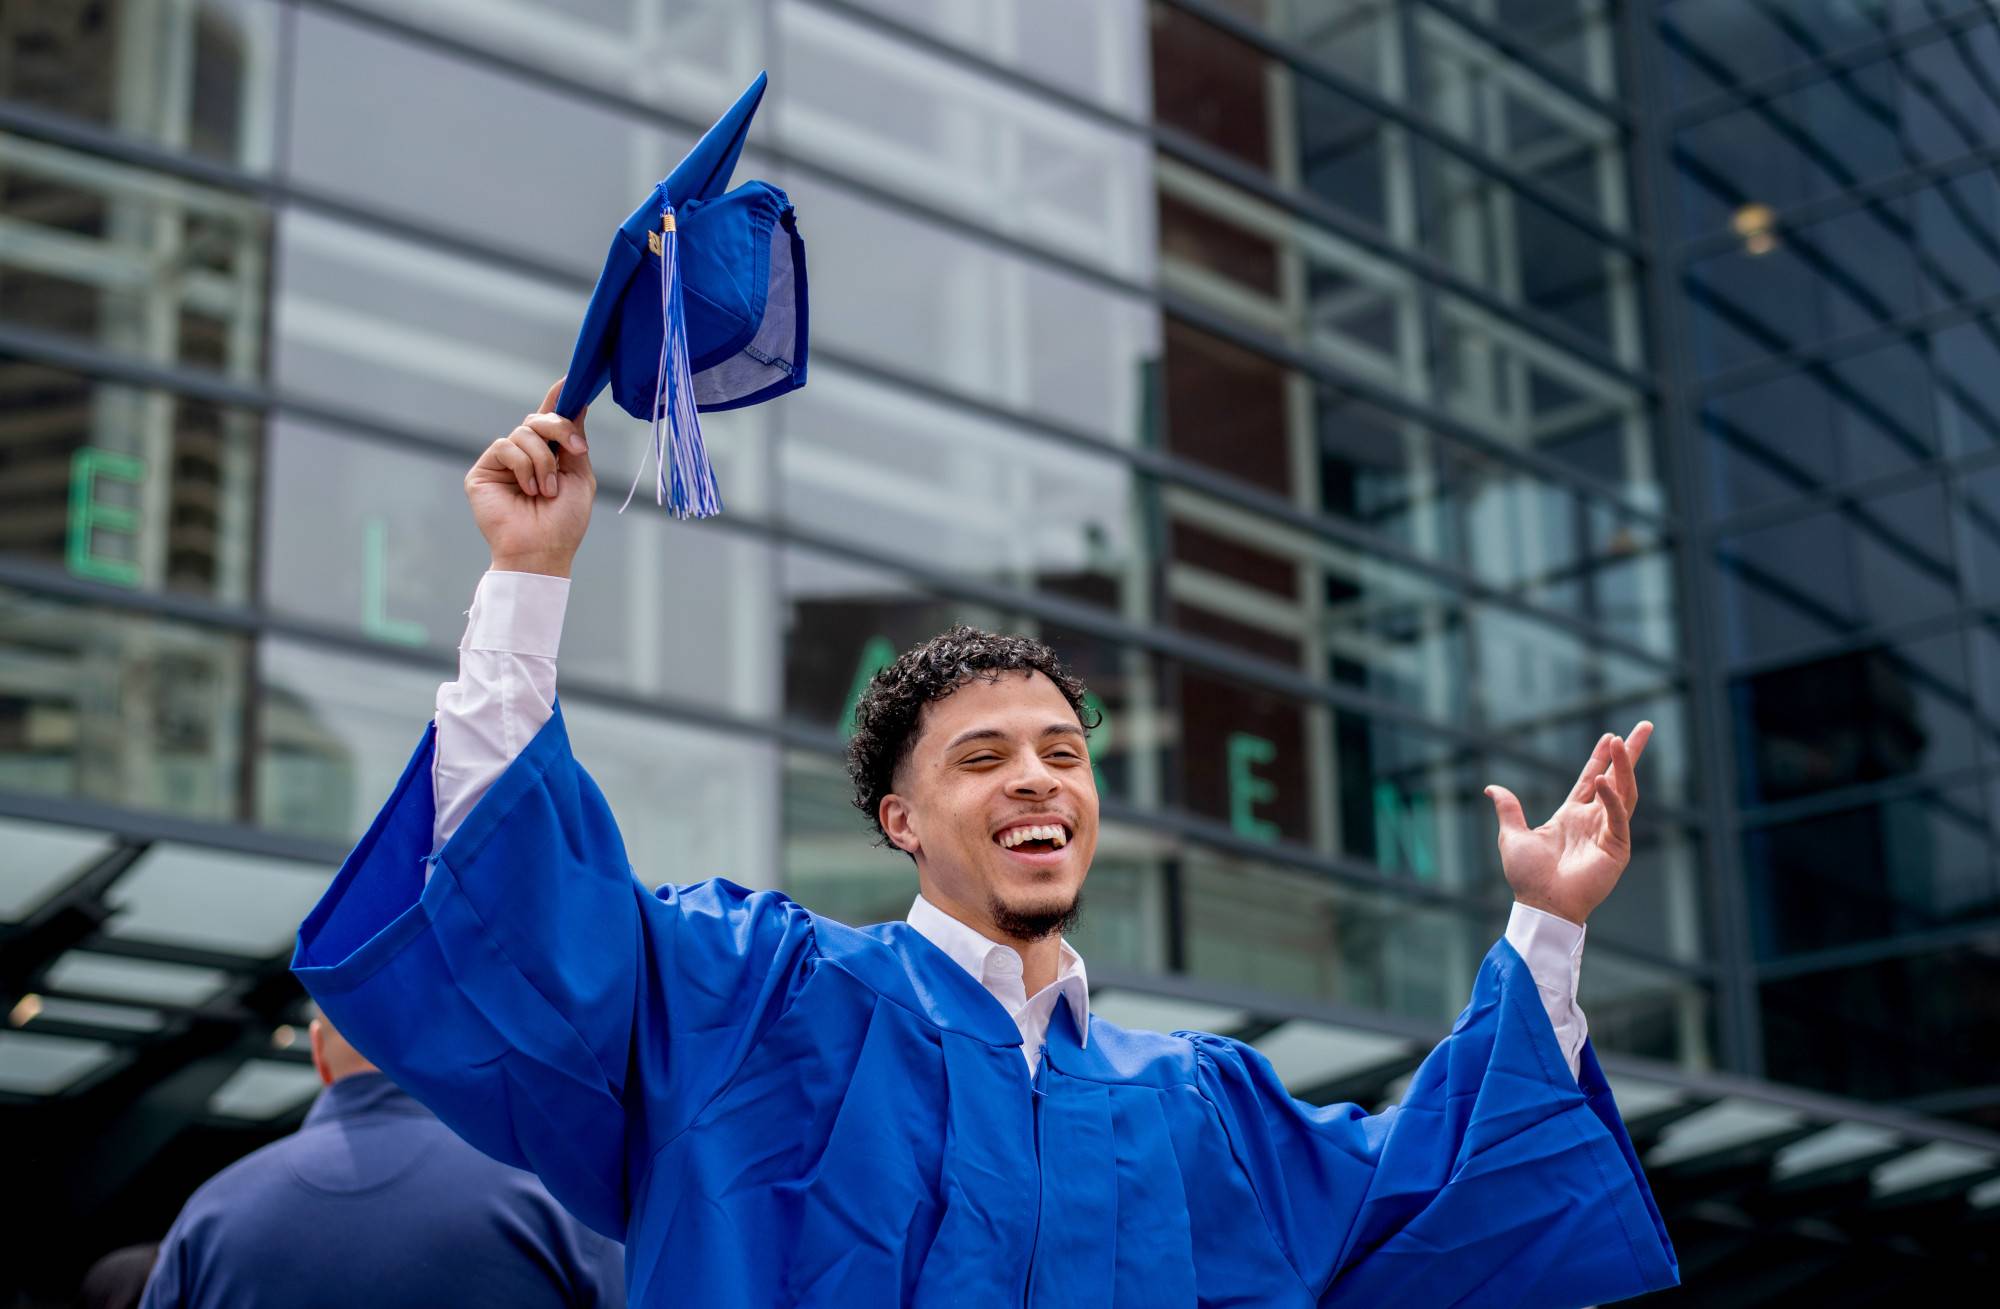 A grad celebrates with his cap raised outside Van Andel arena